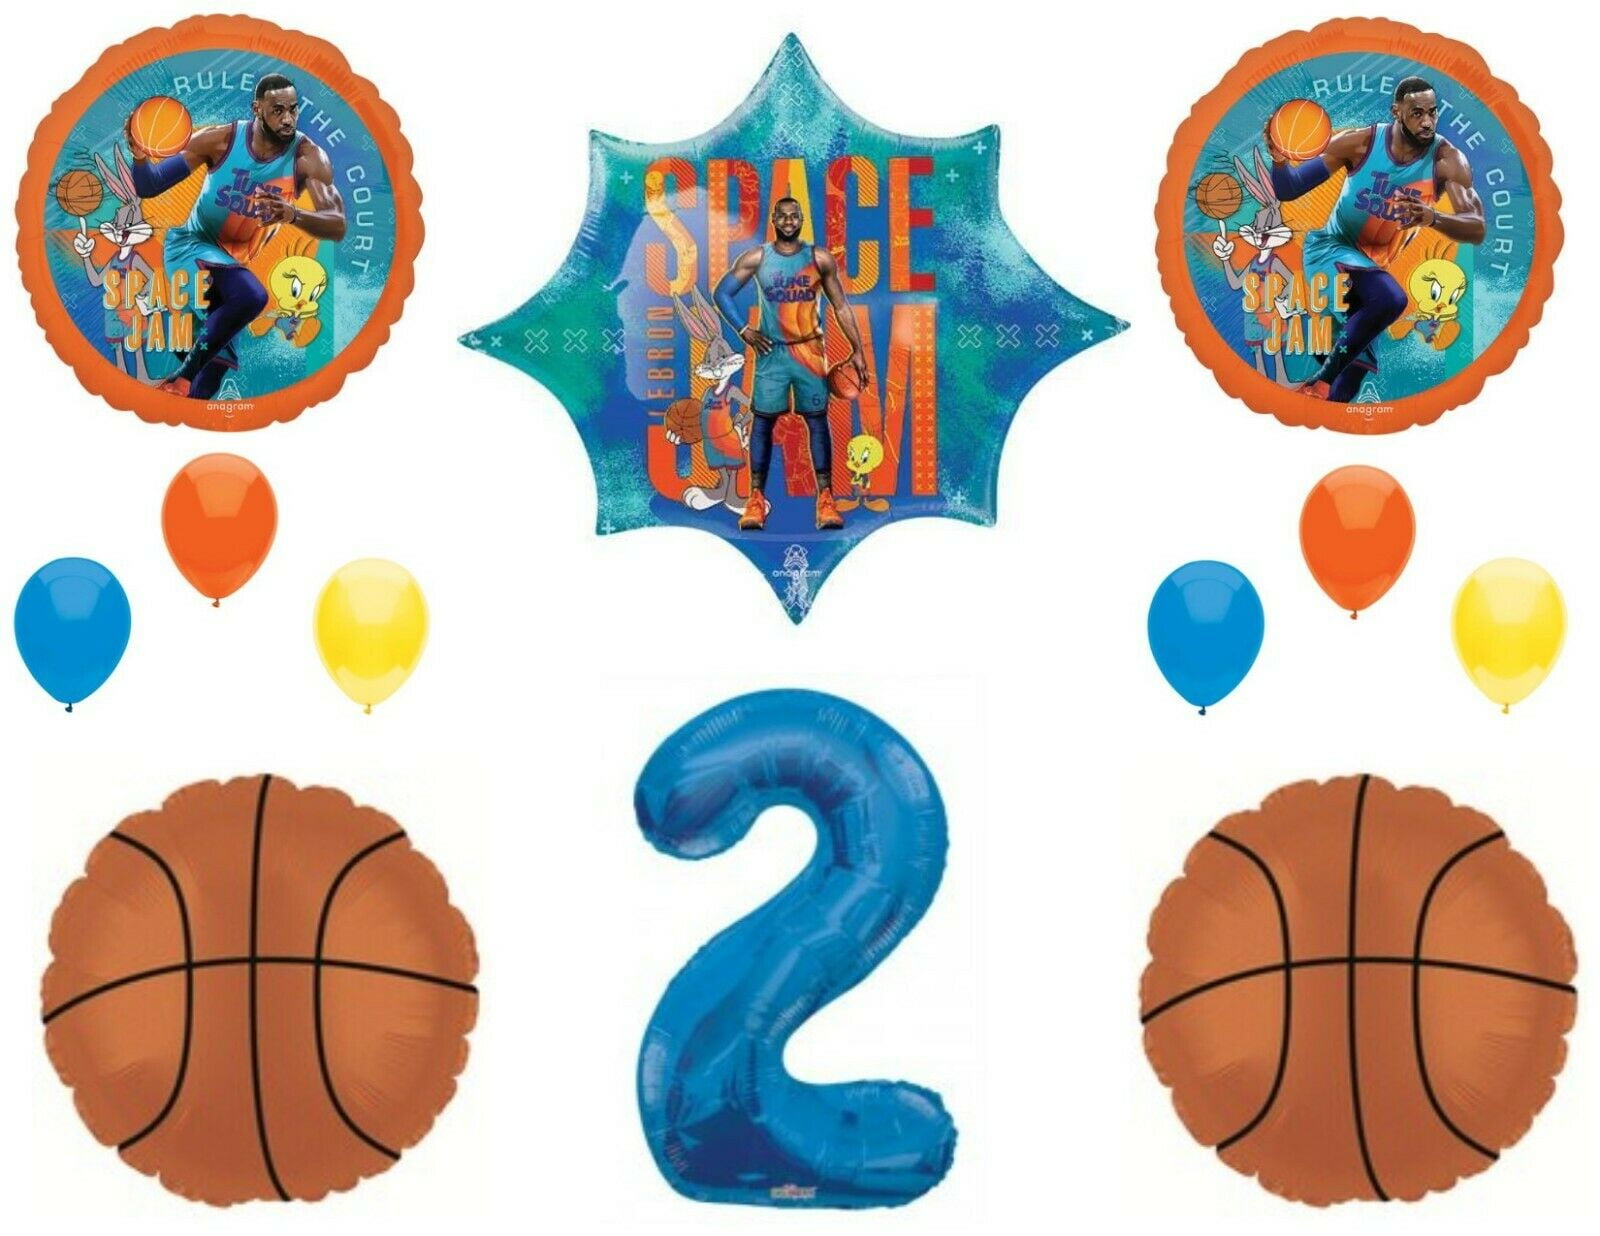 Cake Toppers Balloons Space Jam Party Supplies Basketball Birthday Party Supplies for Boys and Girls Space Jam Birthday Party Decorations Include Happy Birthday Banner Hanging Swirls